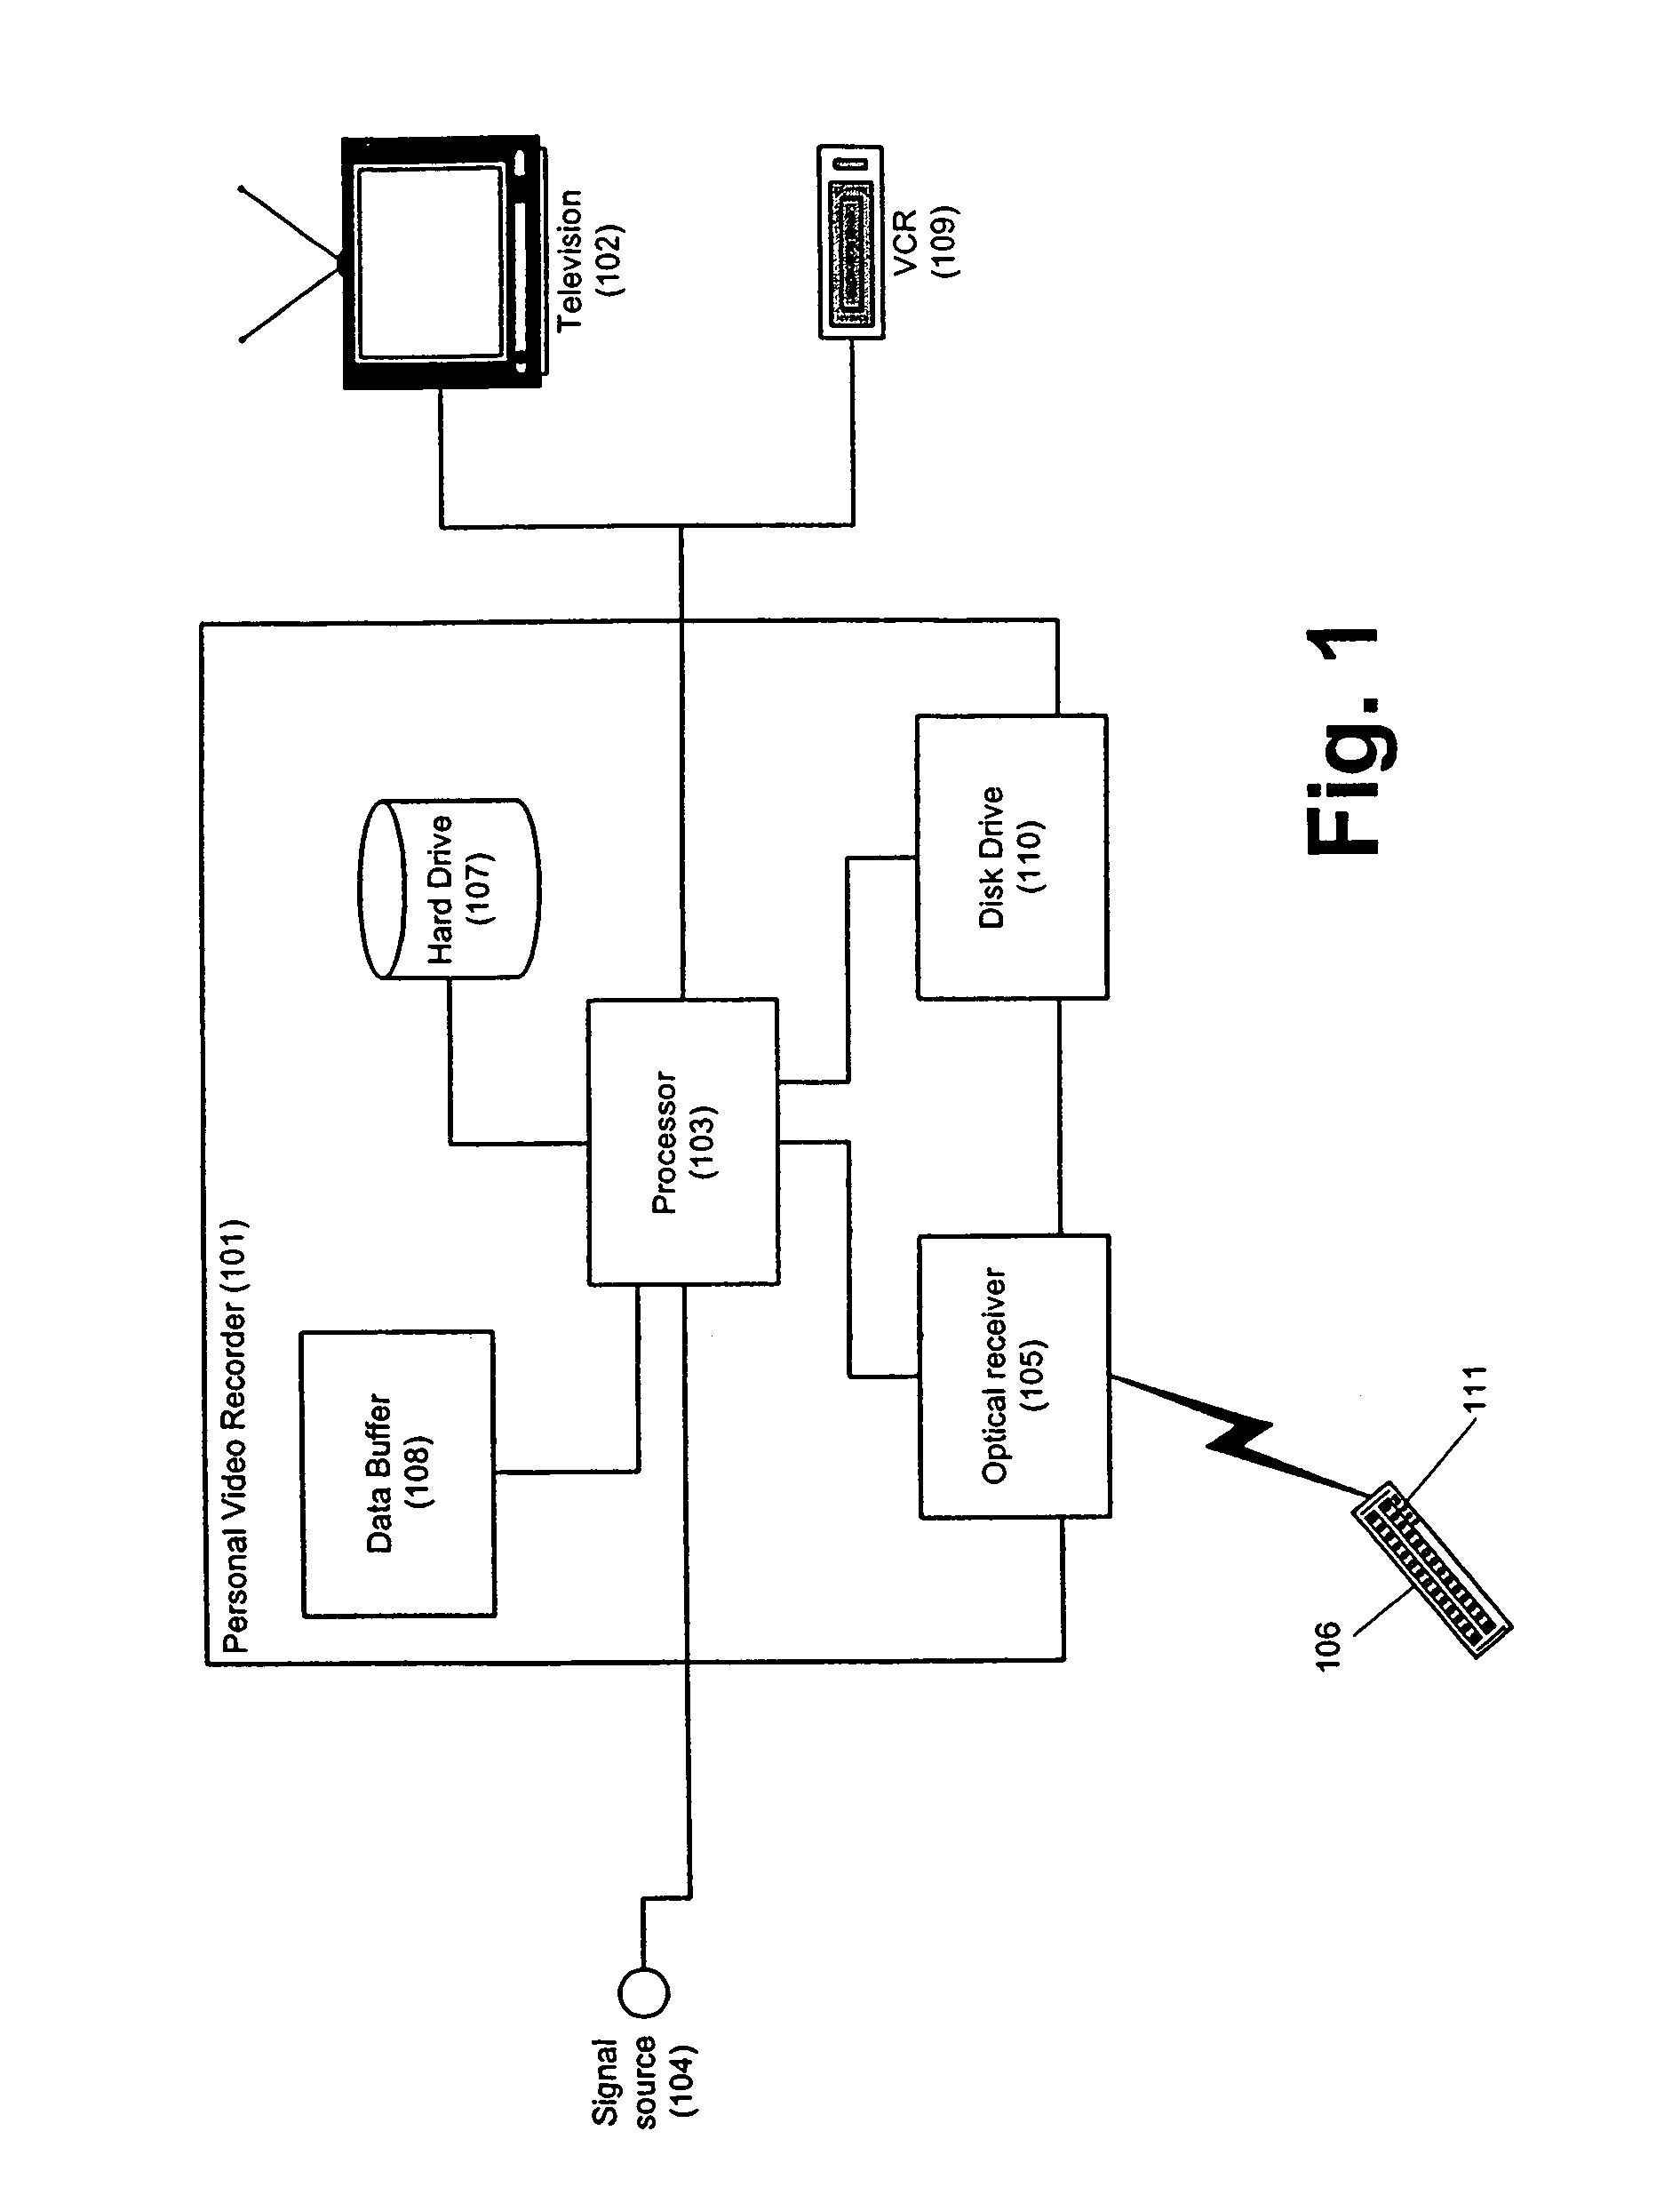 Method and system for electronic capture of user-selected segments of a broadcast data signal